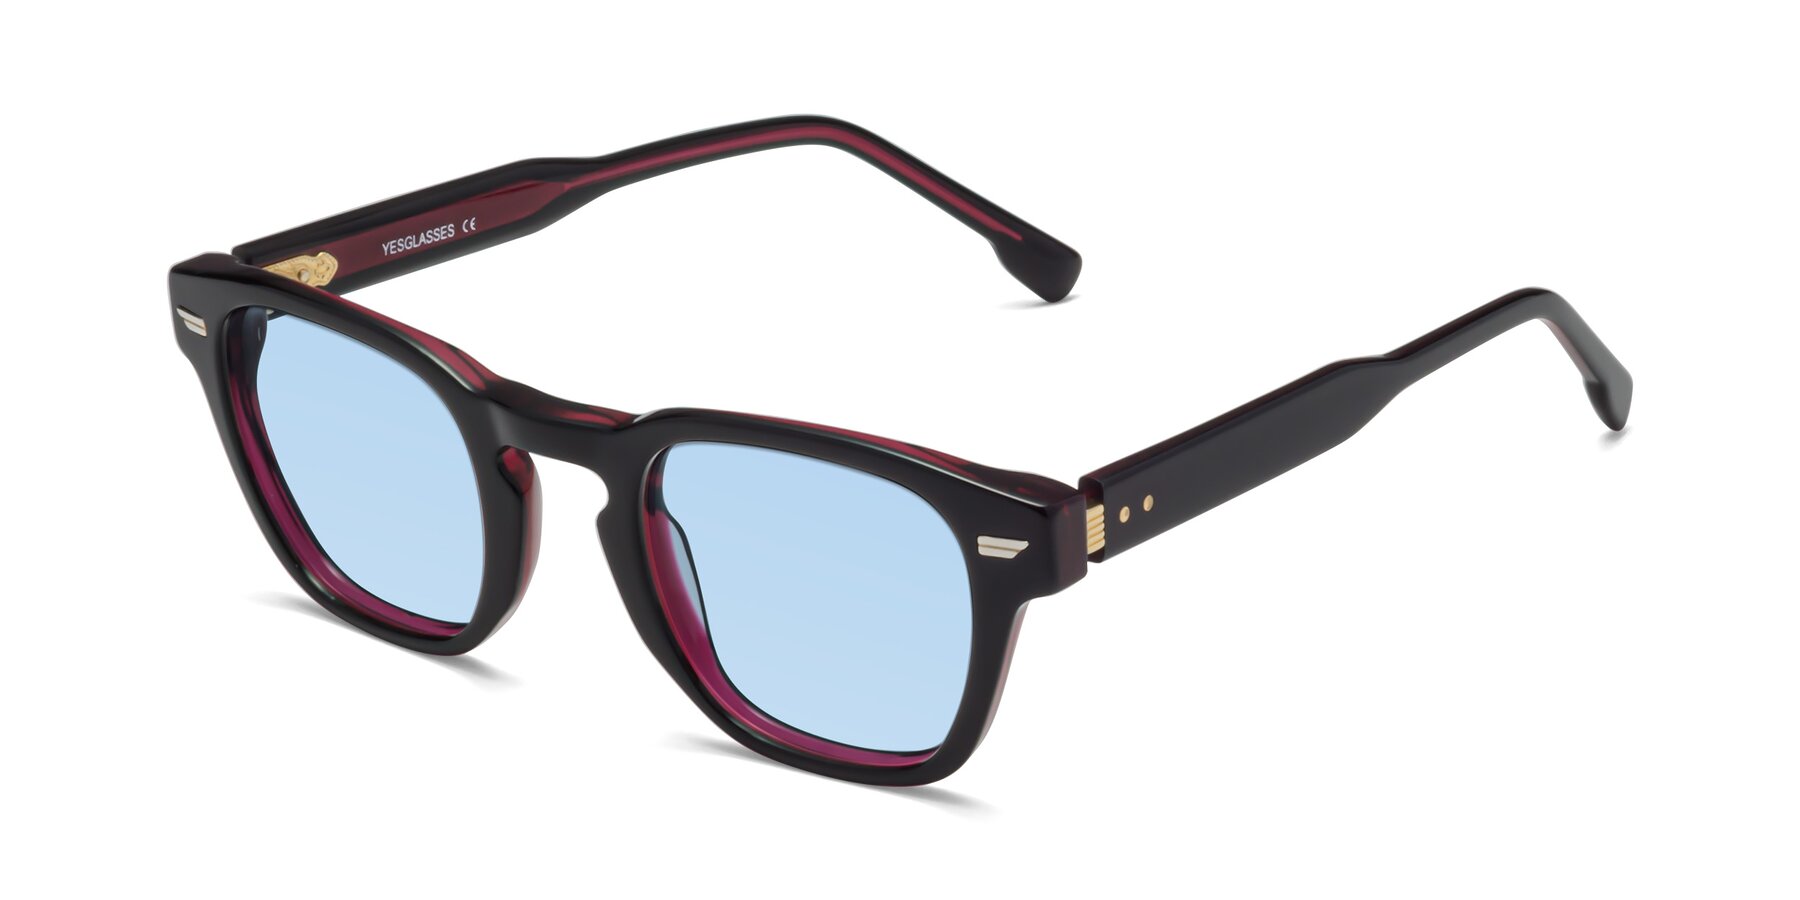 Angle of 1421 in Black-Wine with Light Blue Tinted Lenses